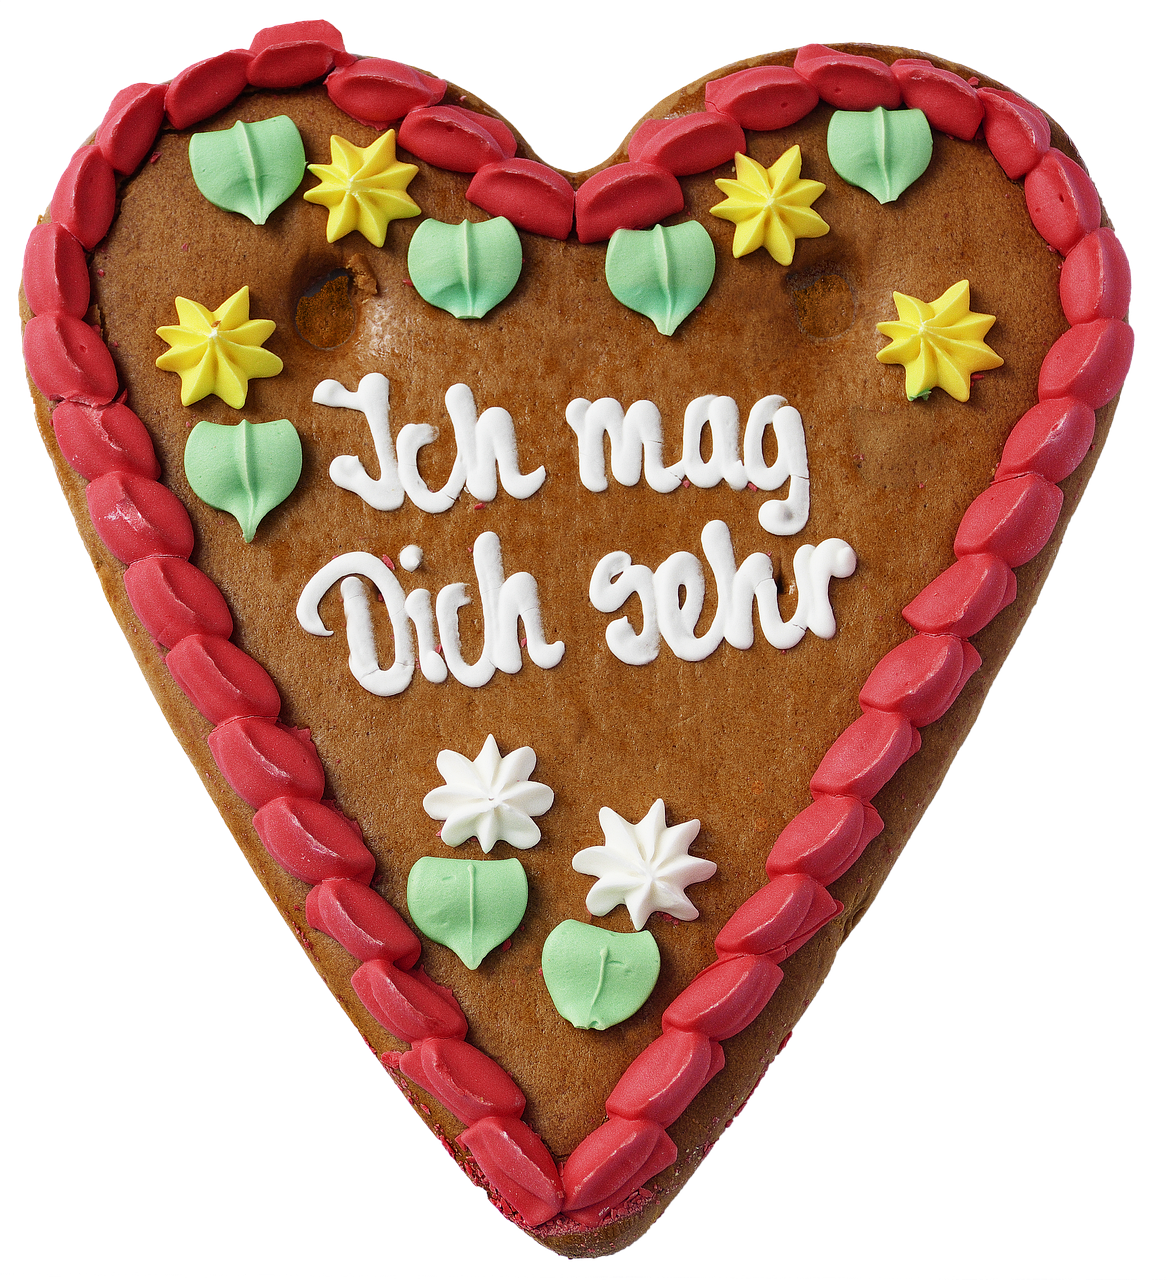 a close up of a heart shaped cake with icing, a photo, by Dietmar Damerau, folk art, packshot, hr ginger, amusing, with text